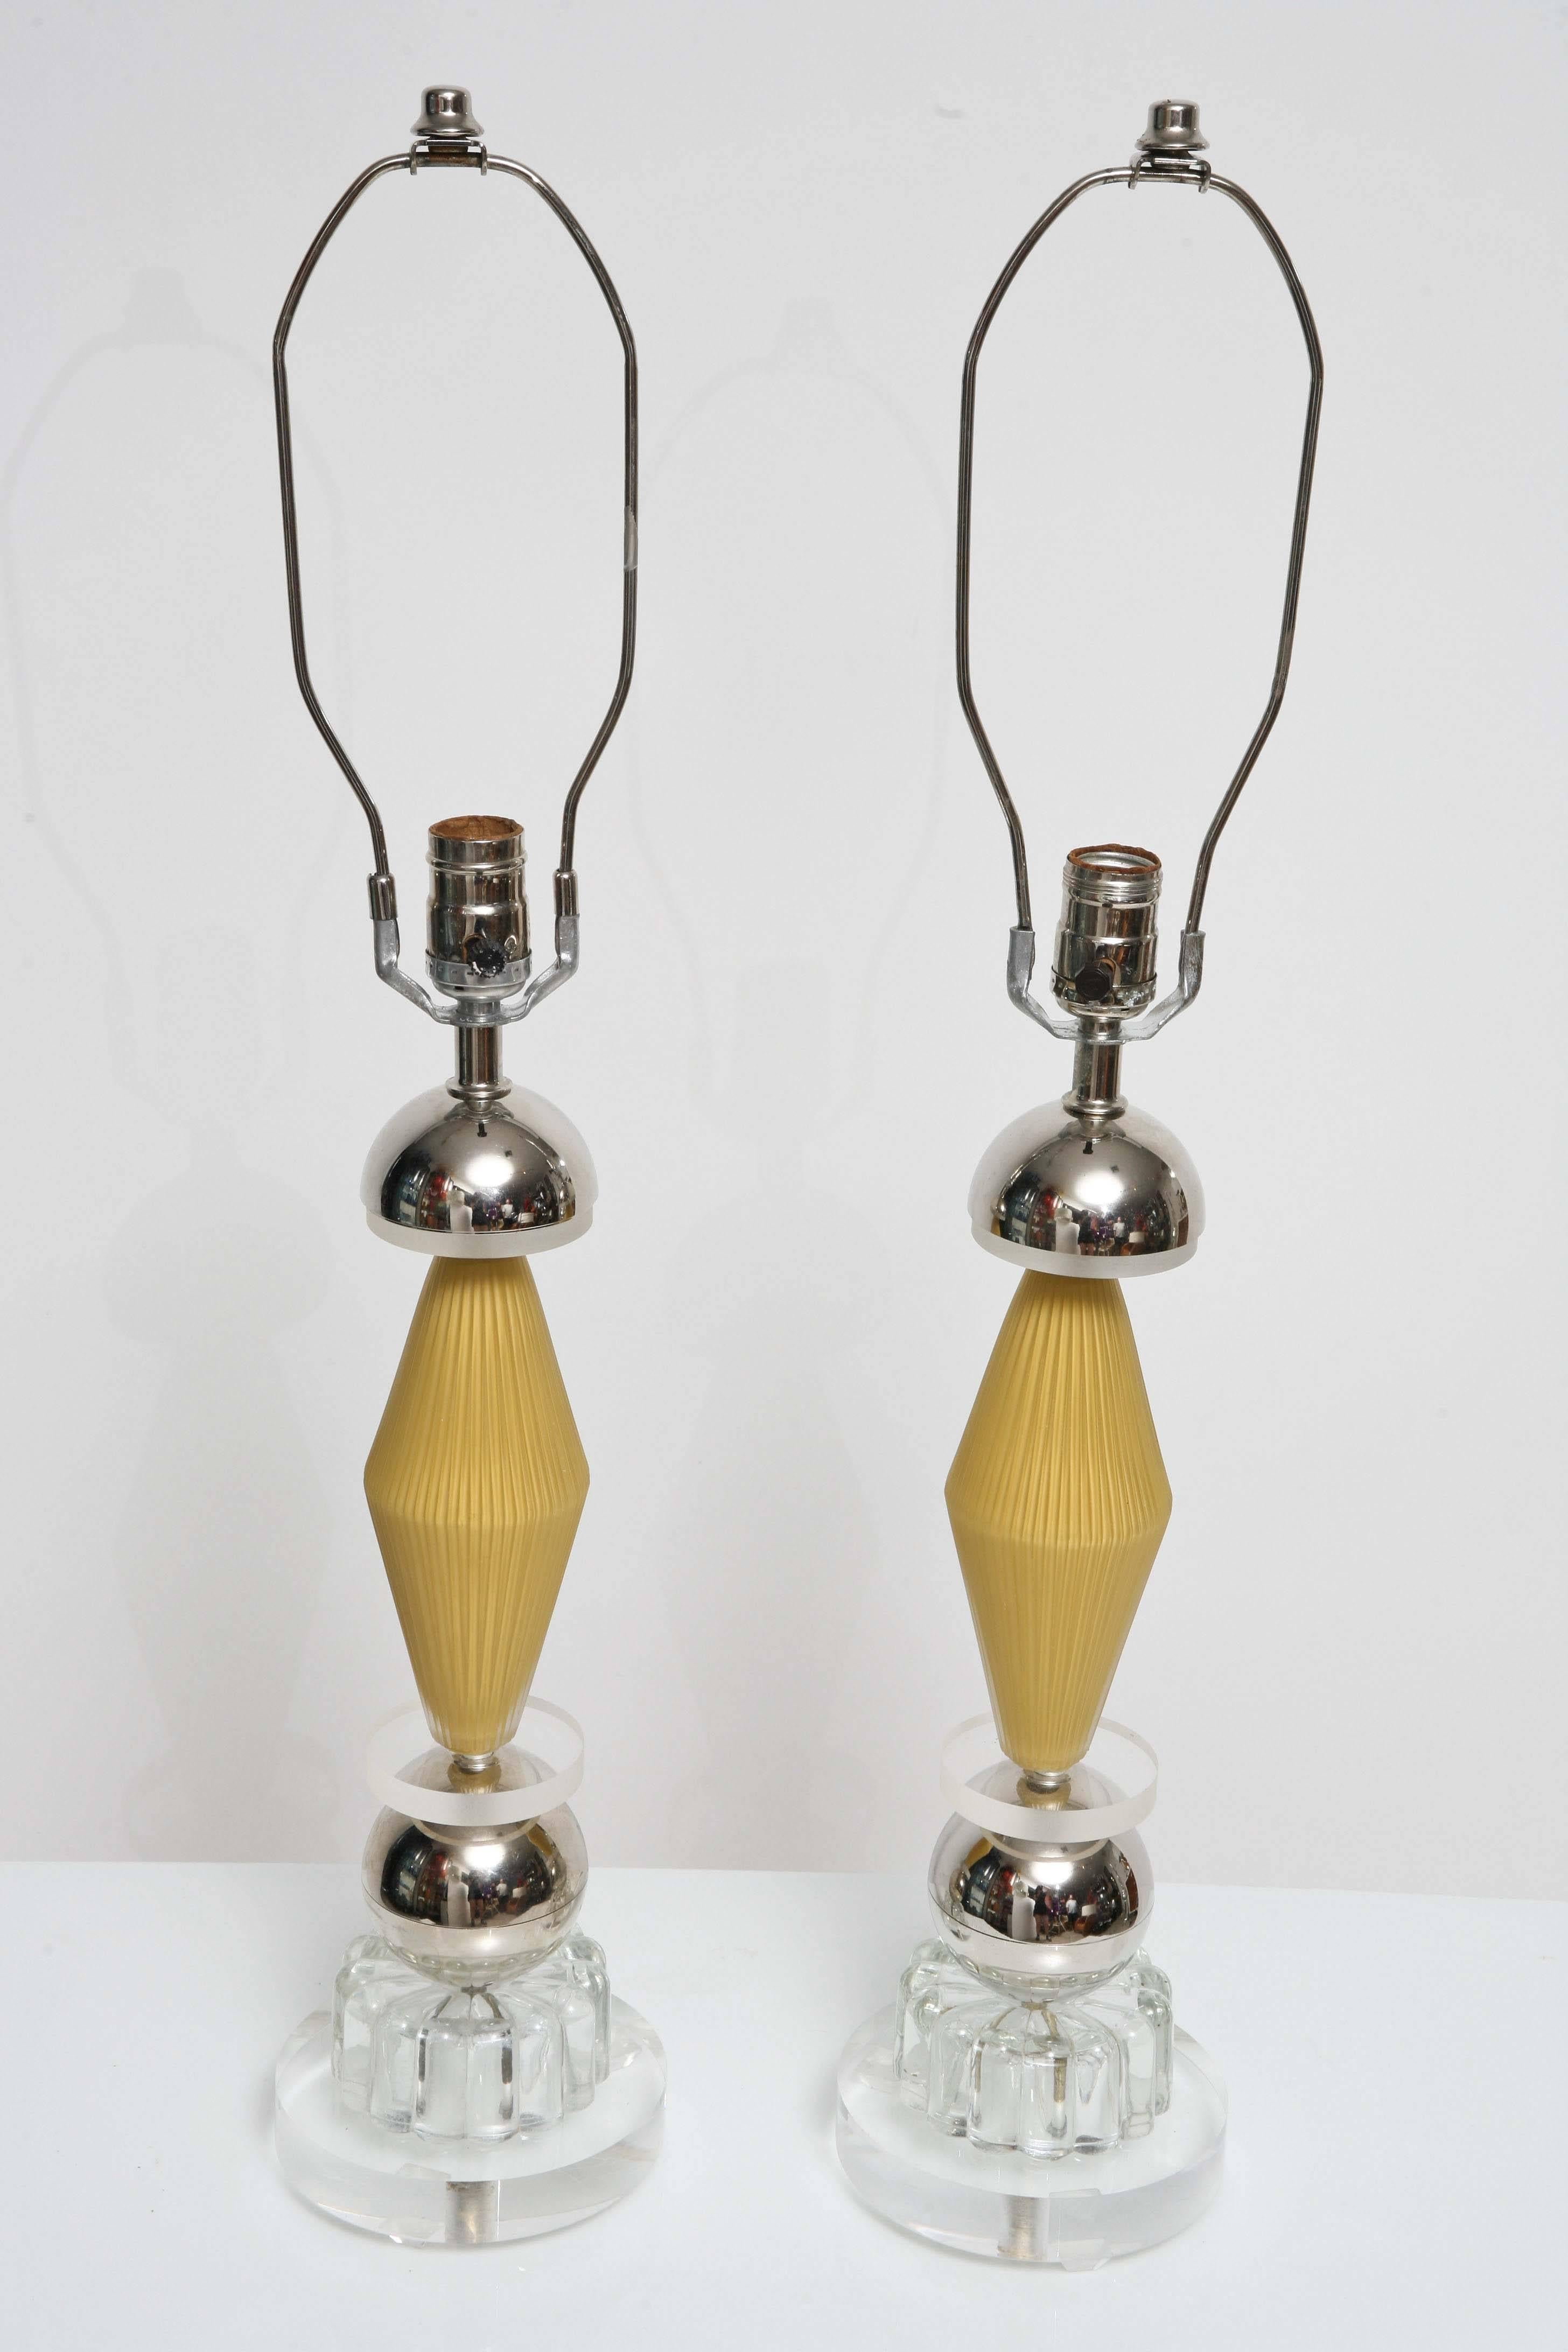 These lamps have a very unique look, though vintage they have a very post modern, Memphis look. Made of glass / Lucite / chrome, these lamps will definitely make a statement. Wiring is original and in working order. Lamps are in very good condition.